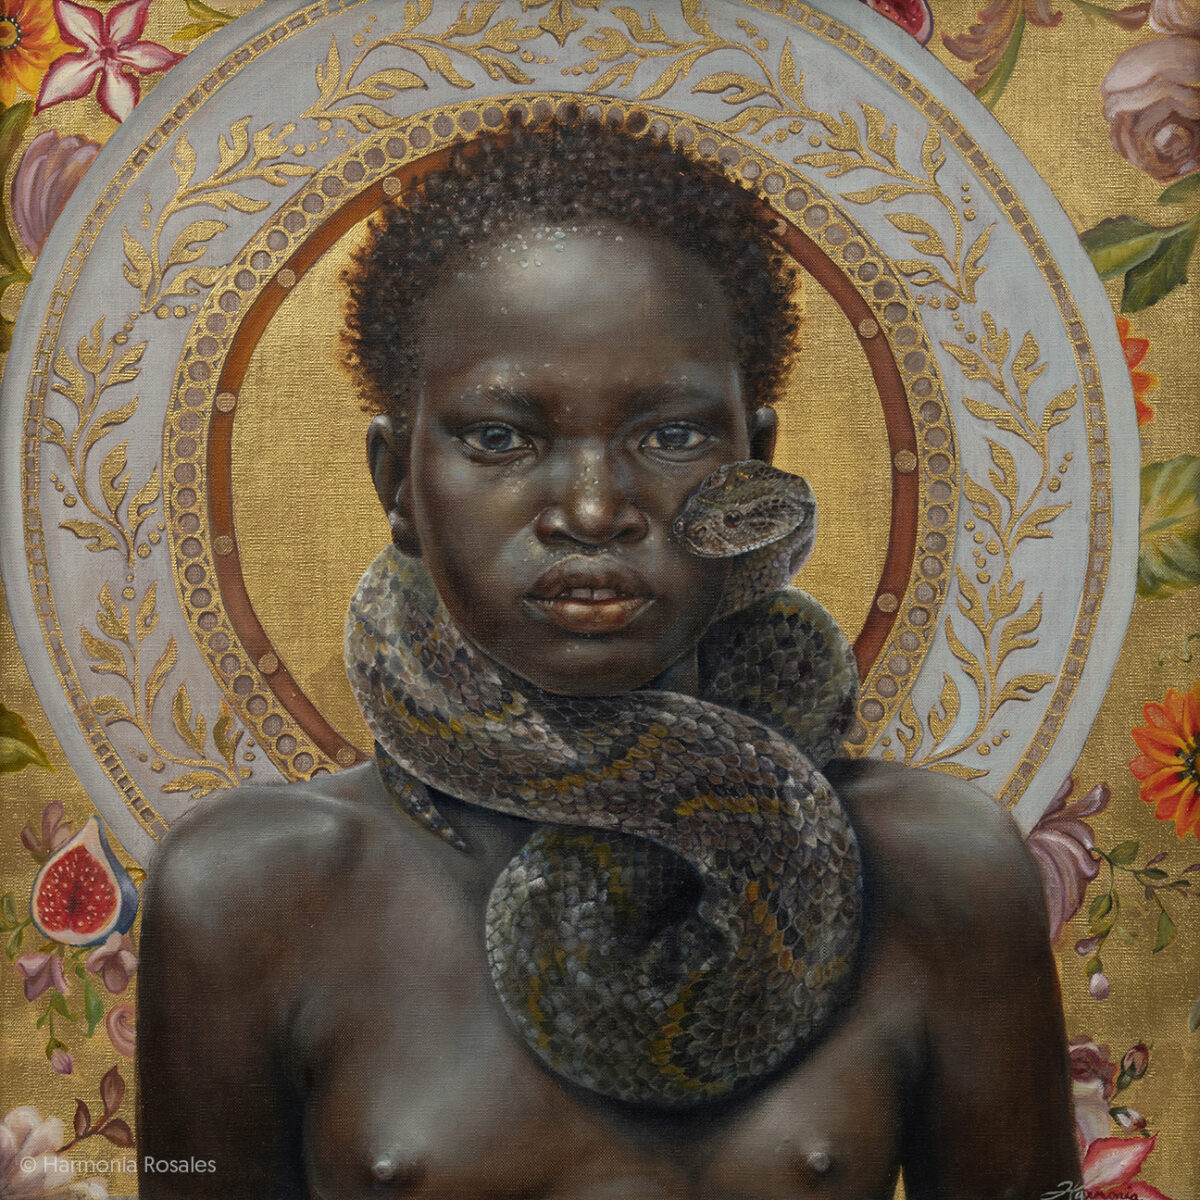 Powerful Portraits Of Black Figures Painted In The Classical European Style By Harmonia Rosales 9 1